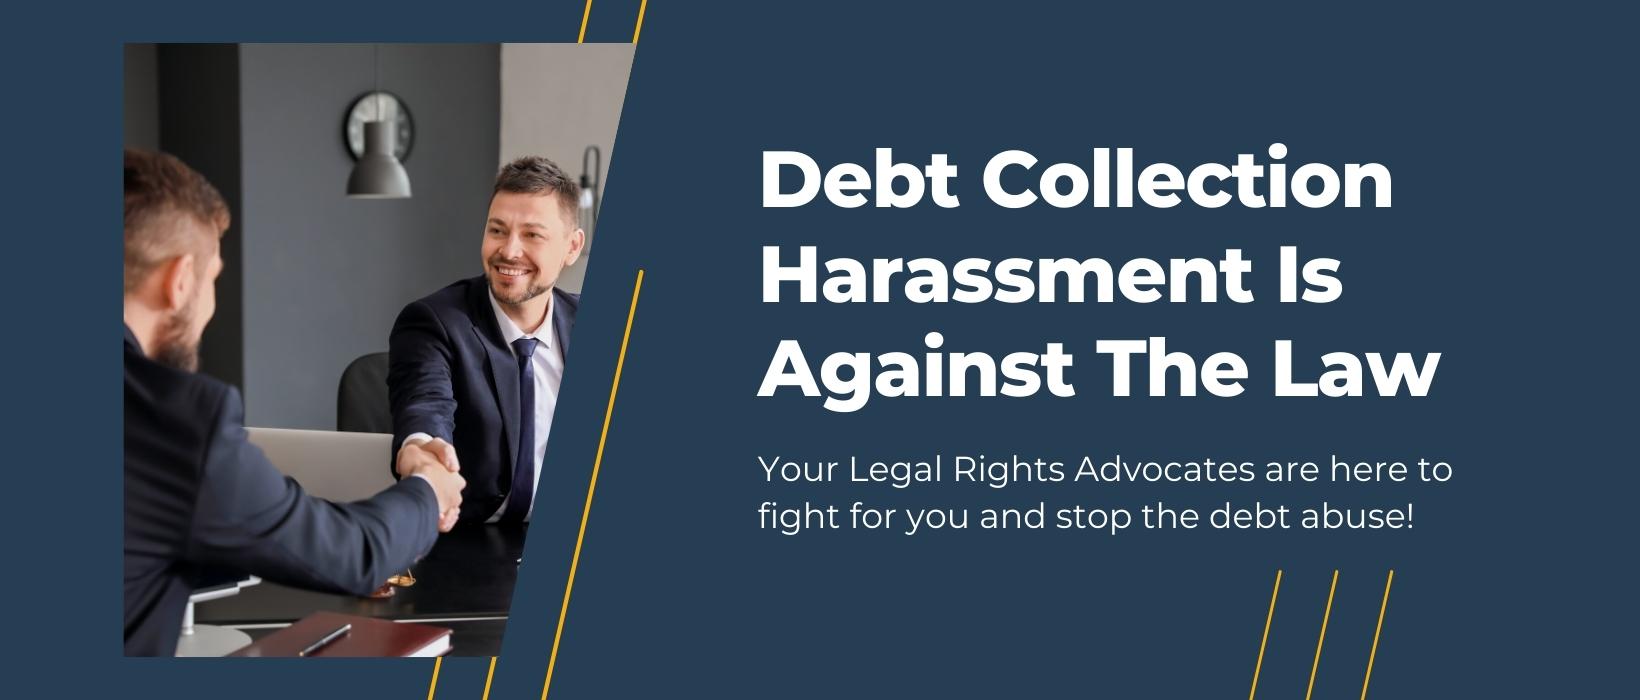 Debt Collection Harassment Lawyers